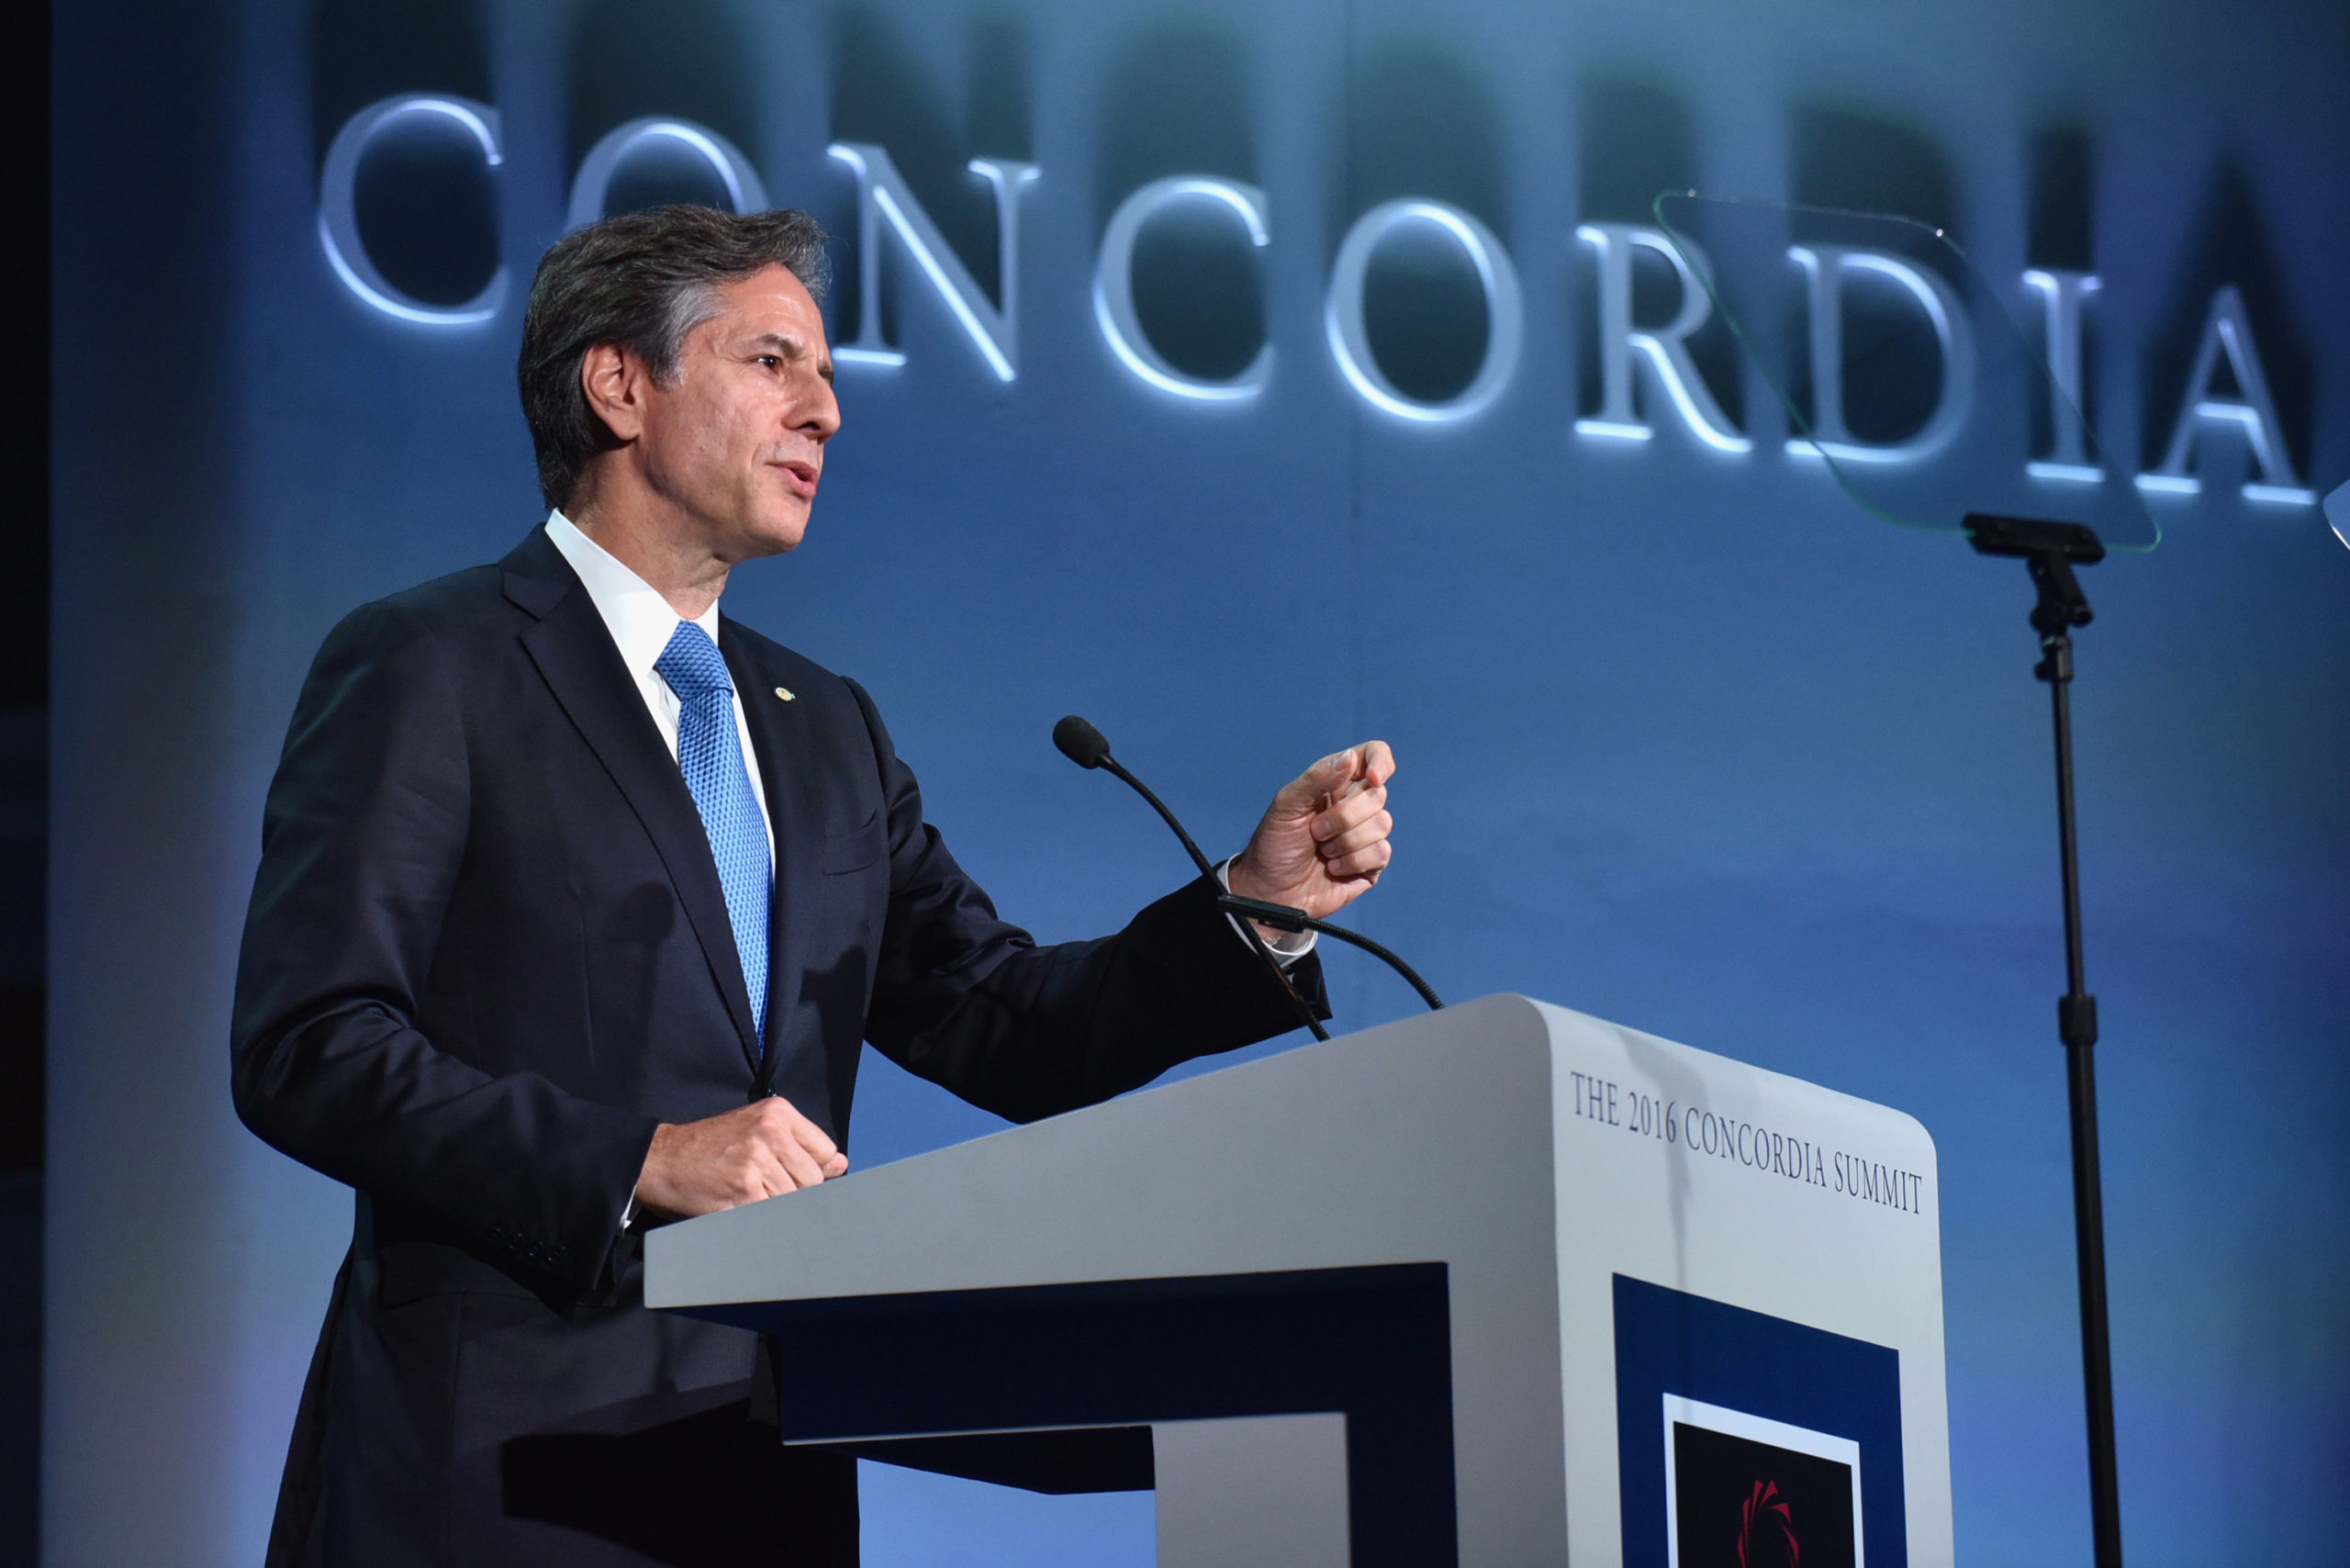 NEW YORK, NY - SEPTEMBER 19: United States Deputy Secretary of State and the former Deputy National Security Advisor Anthony Blinken speaks at the 2016 Concordia Summit - Day 1 at Grand Hyatt New York on September 19, 2016 in New York City. (Photo by Bryan Bedder/Getty Images for Concordia Summit)